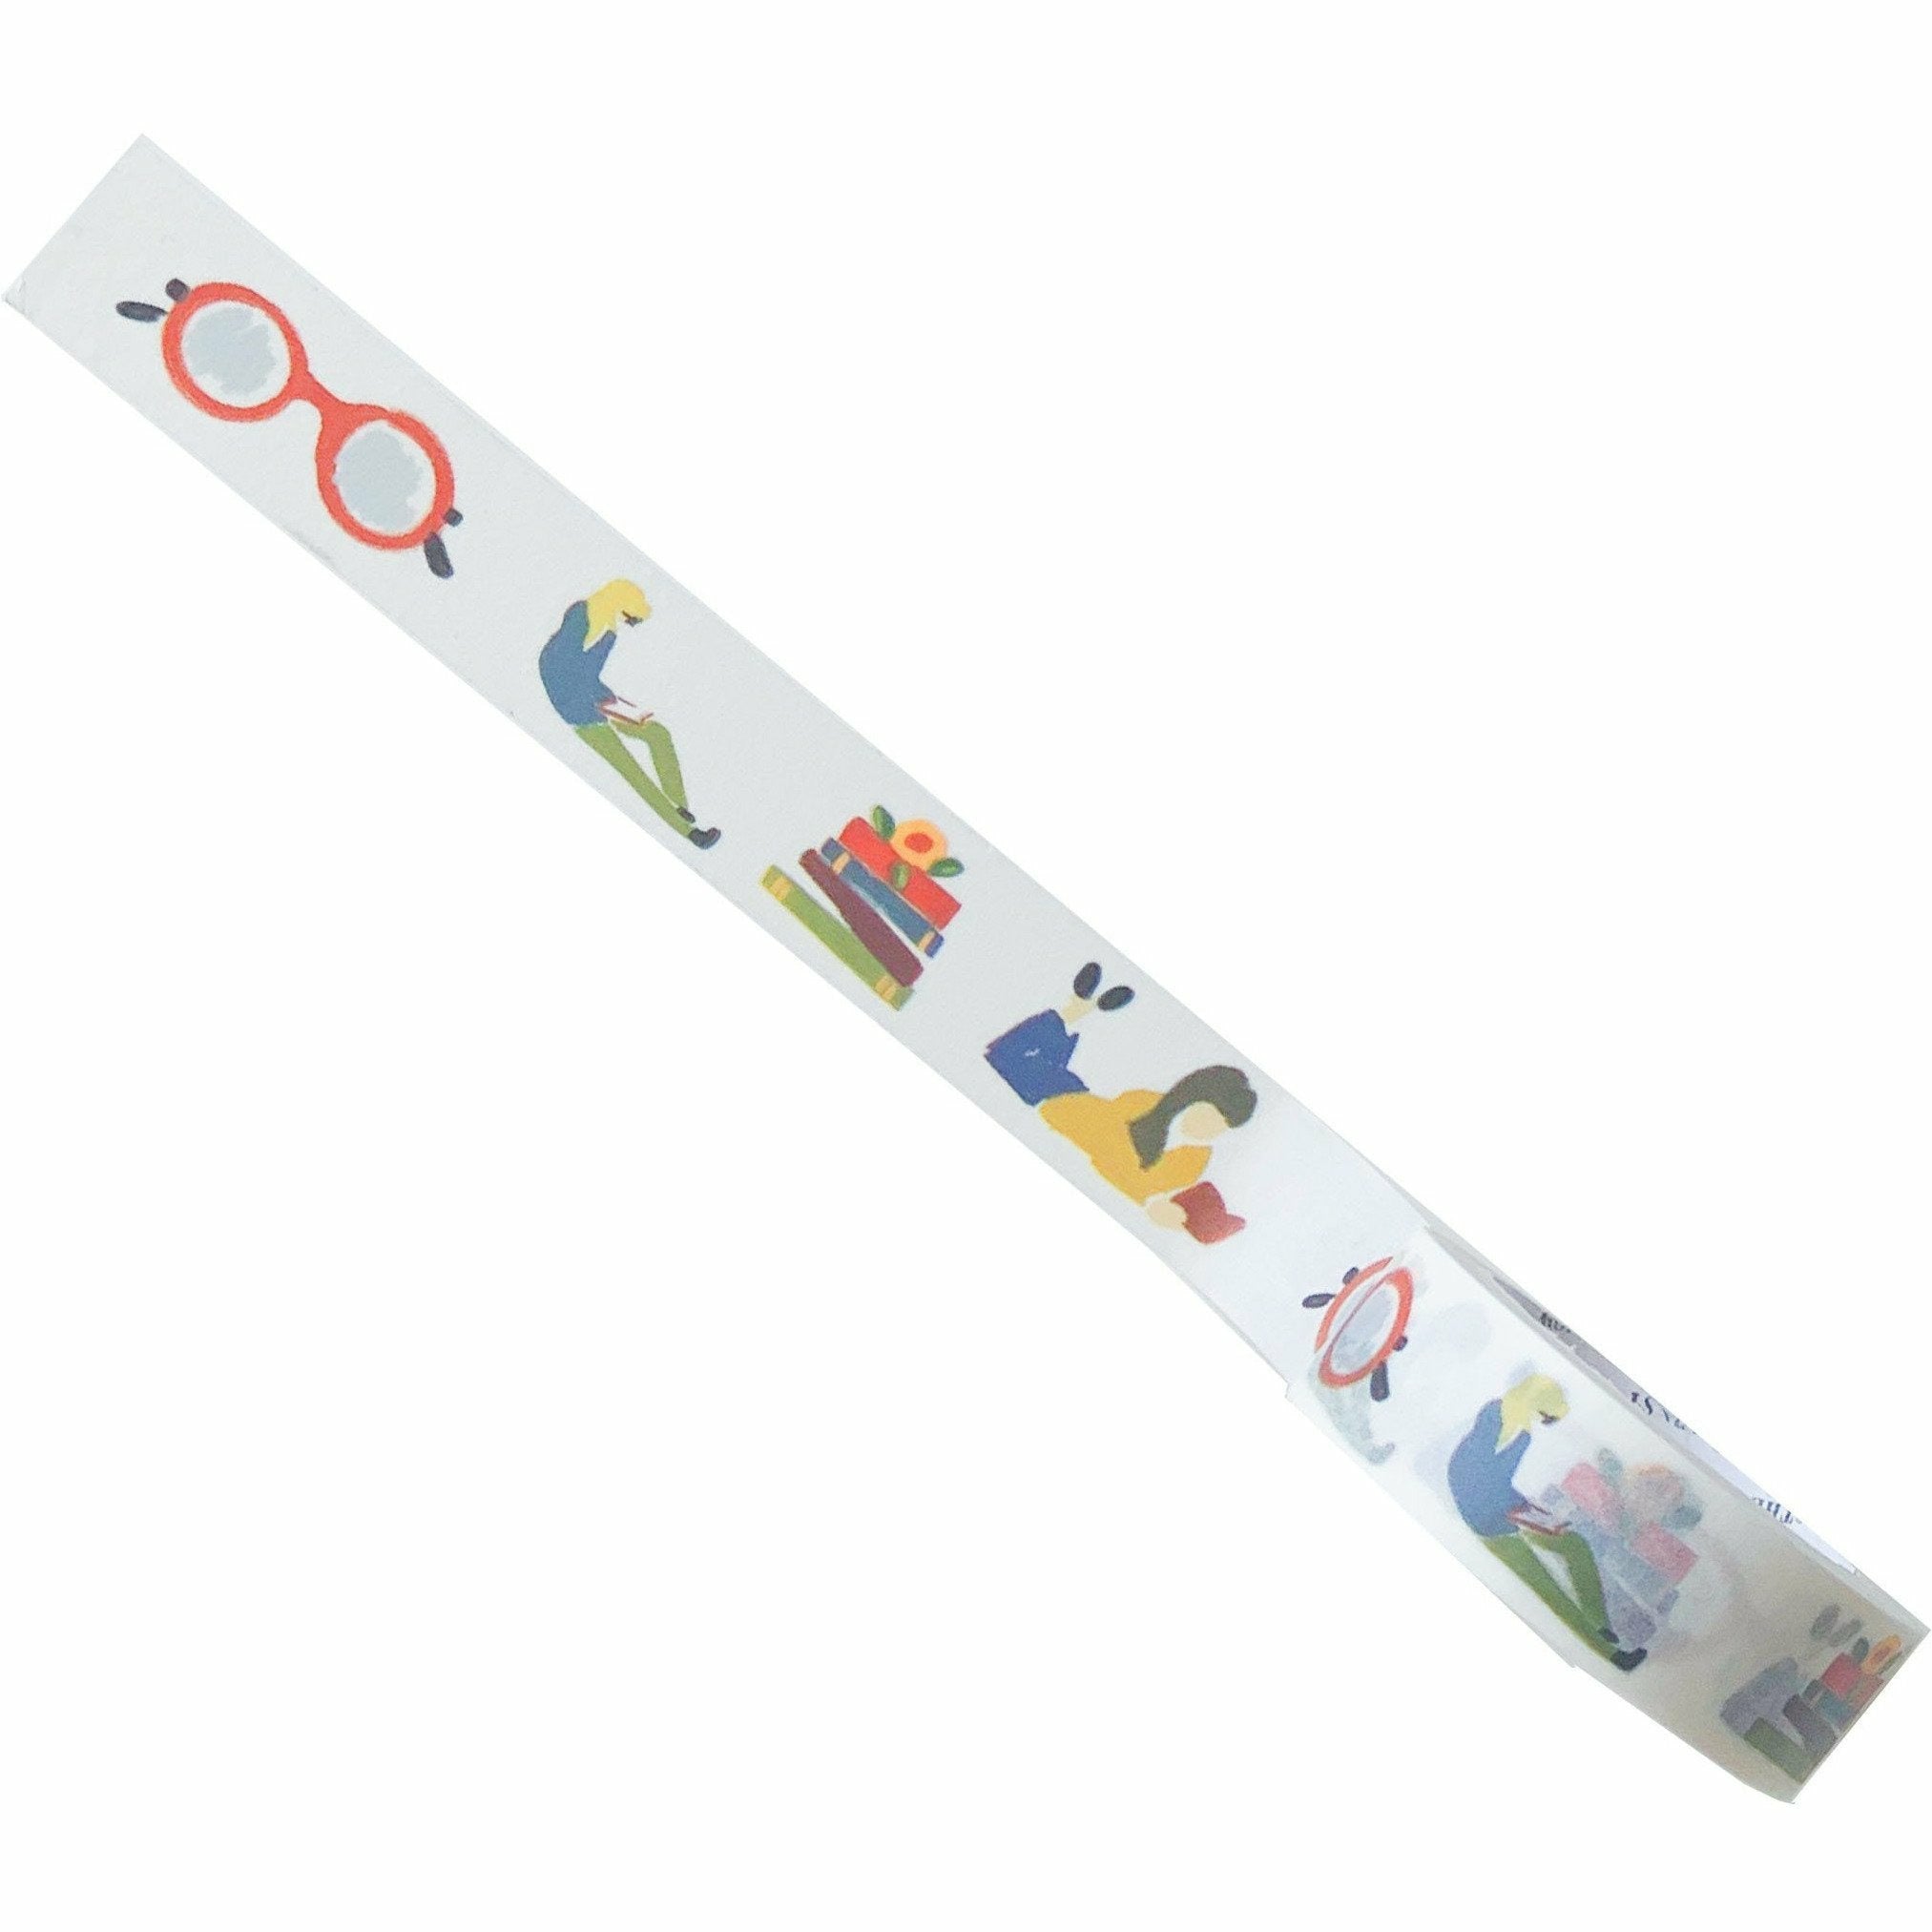 Book Lovers Washi Tape with Colorful Images of Books and Reading